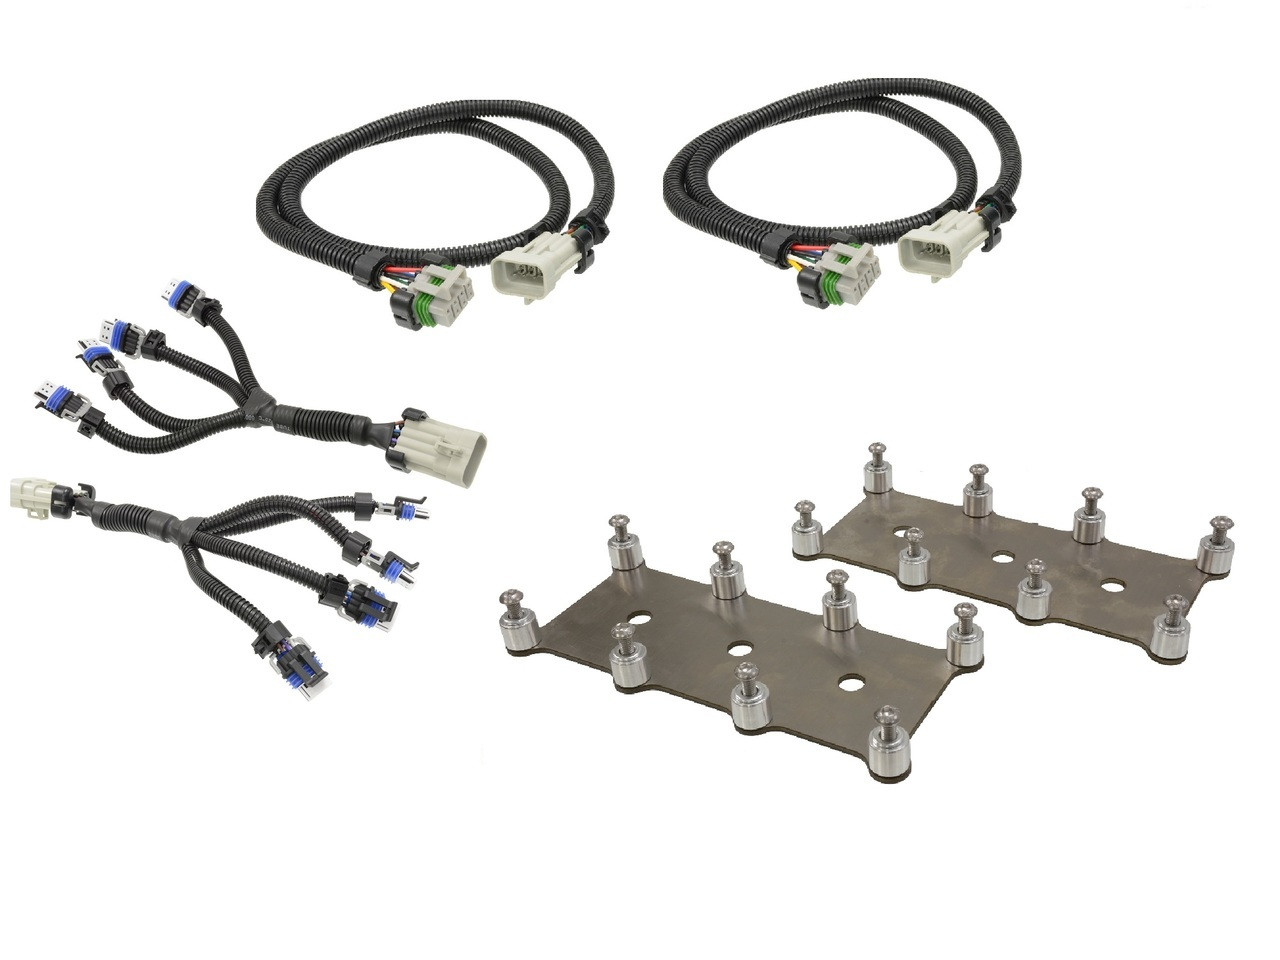 D581 LQ4 LM7 Truck Square Coil Relocation Bracket and Harness Kit - Stainless Steel